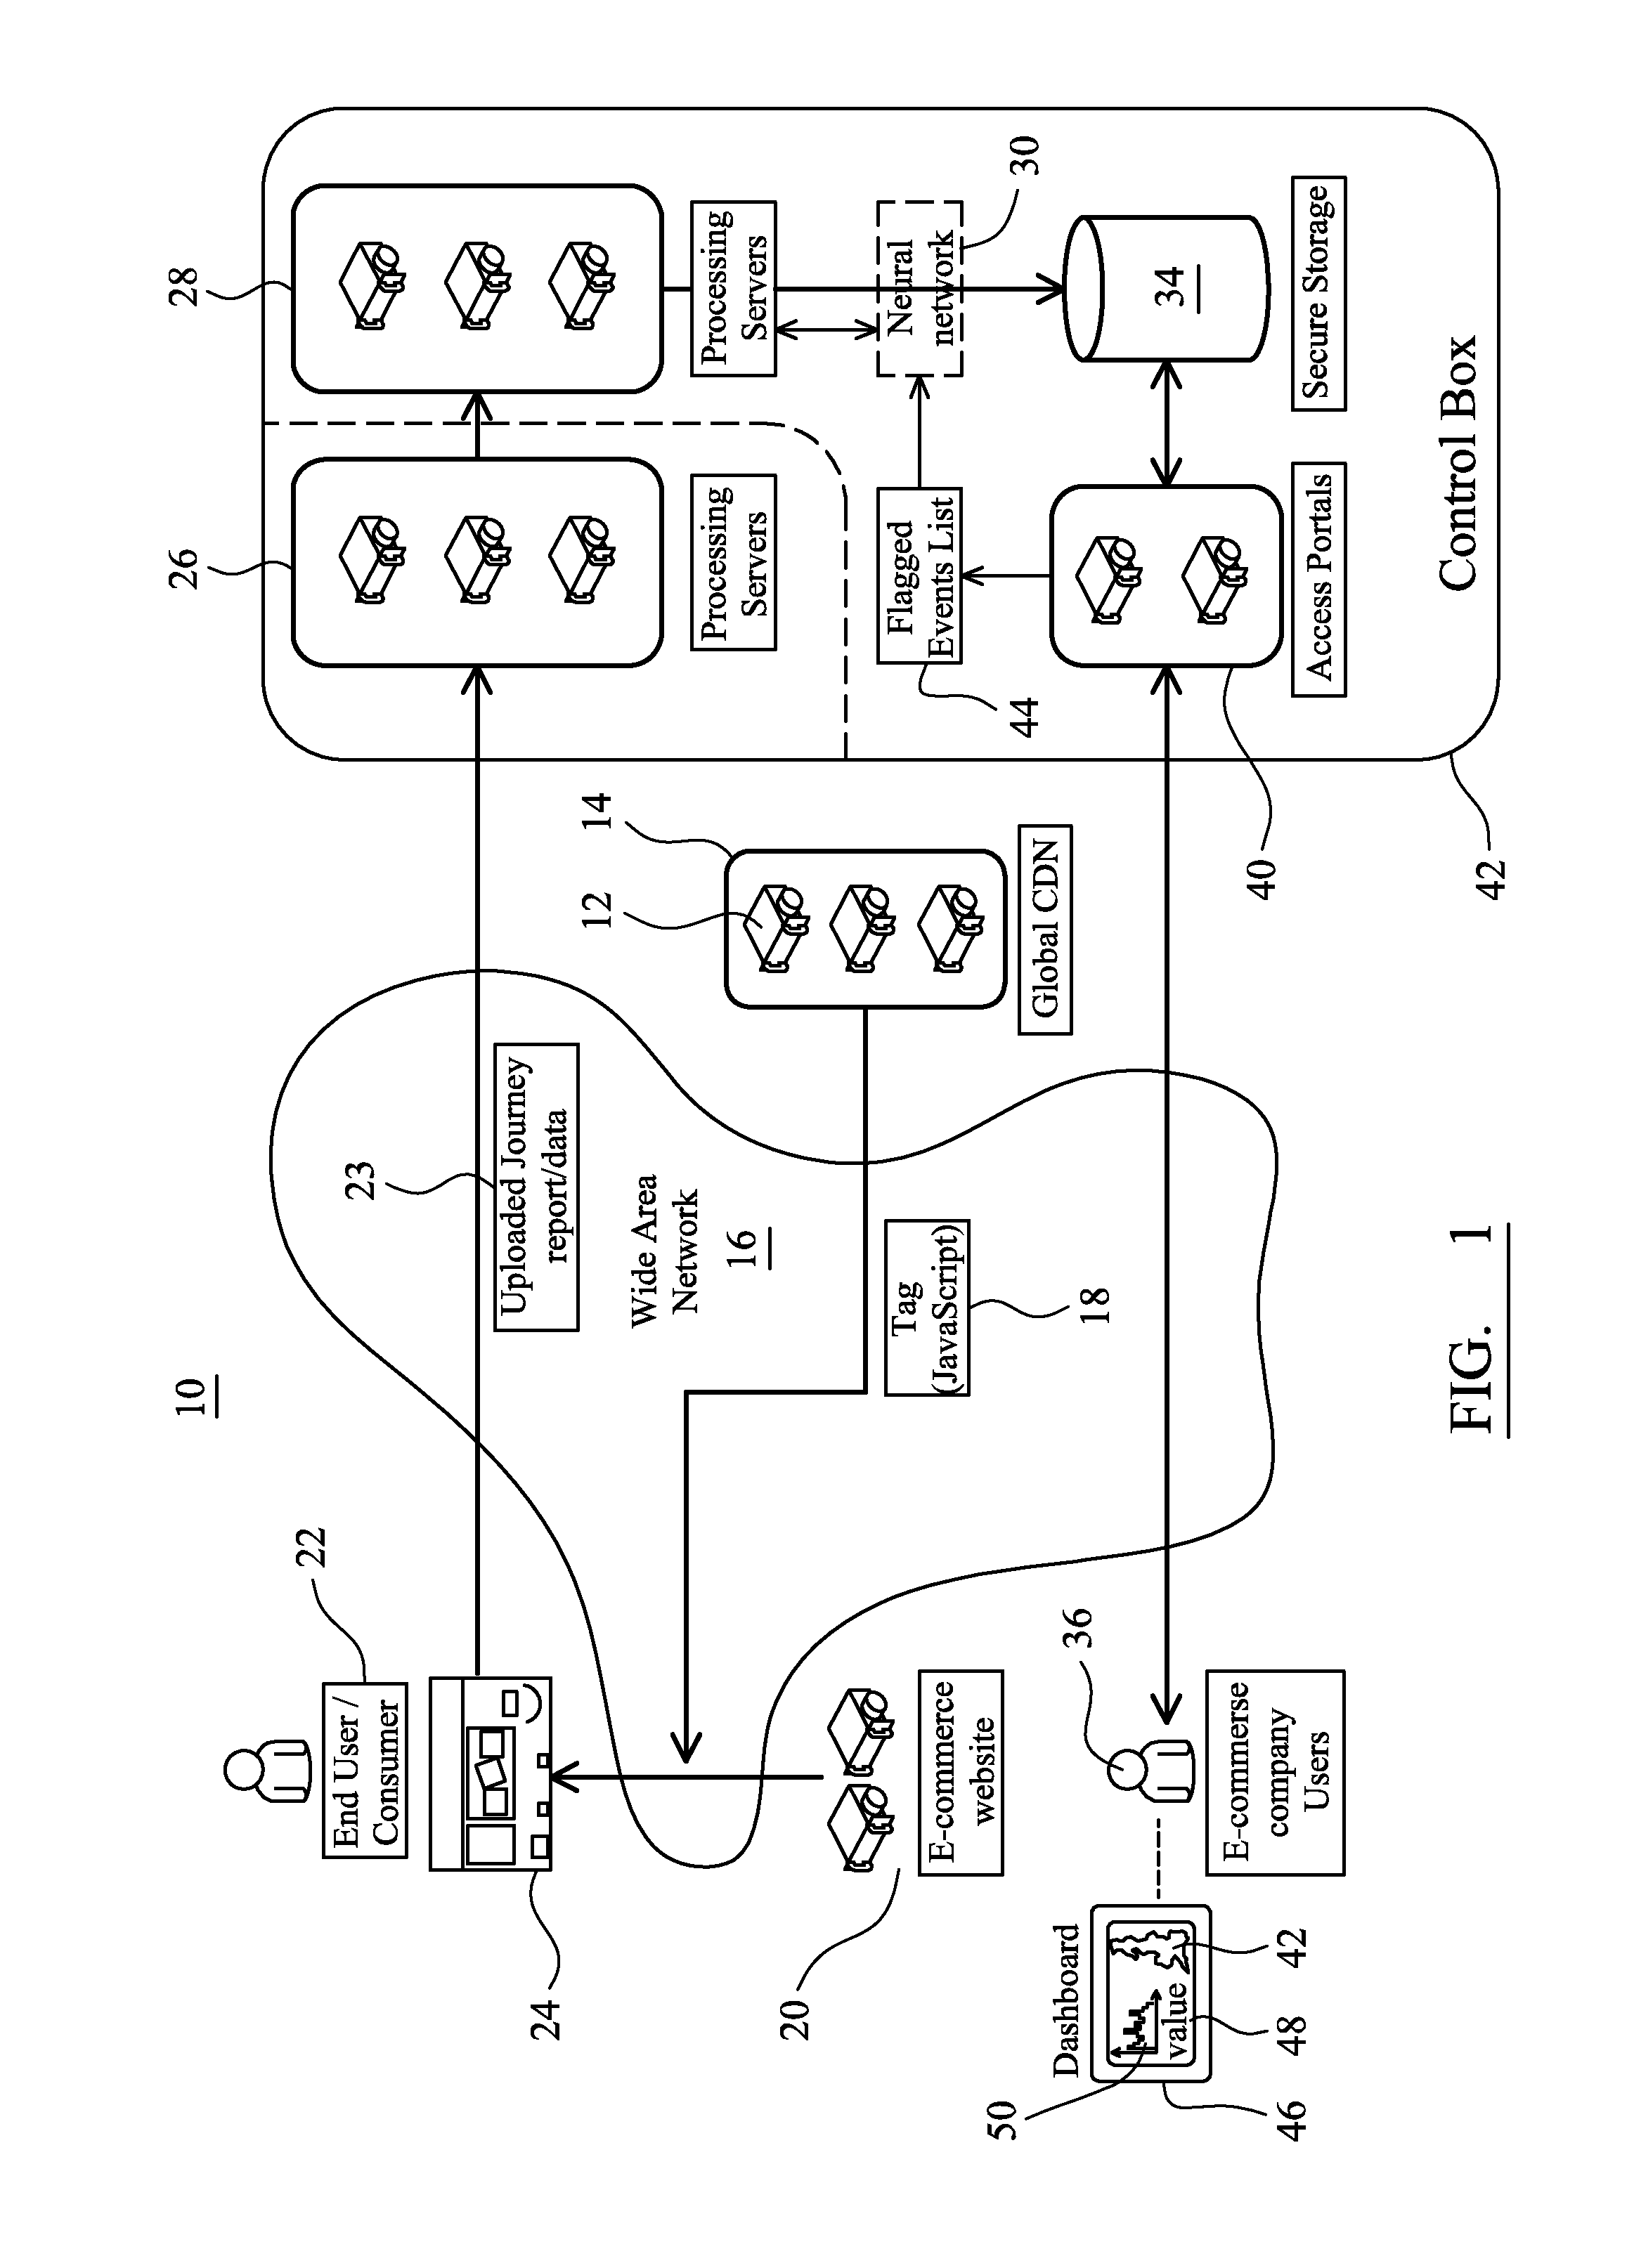 Systems and methods for recording and recreating interactive user-sessions involving an on-line server